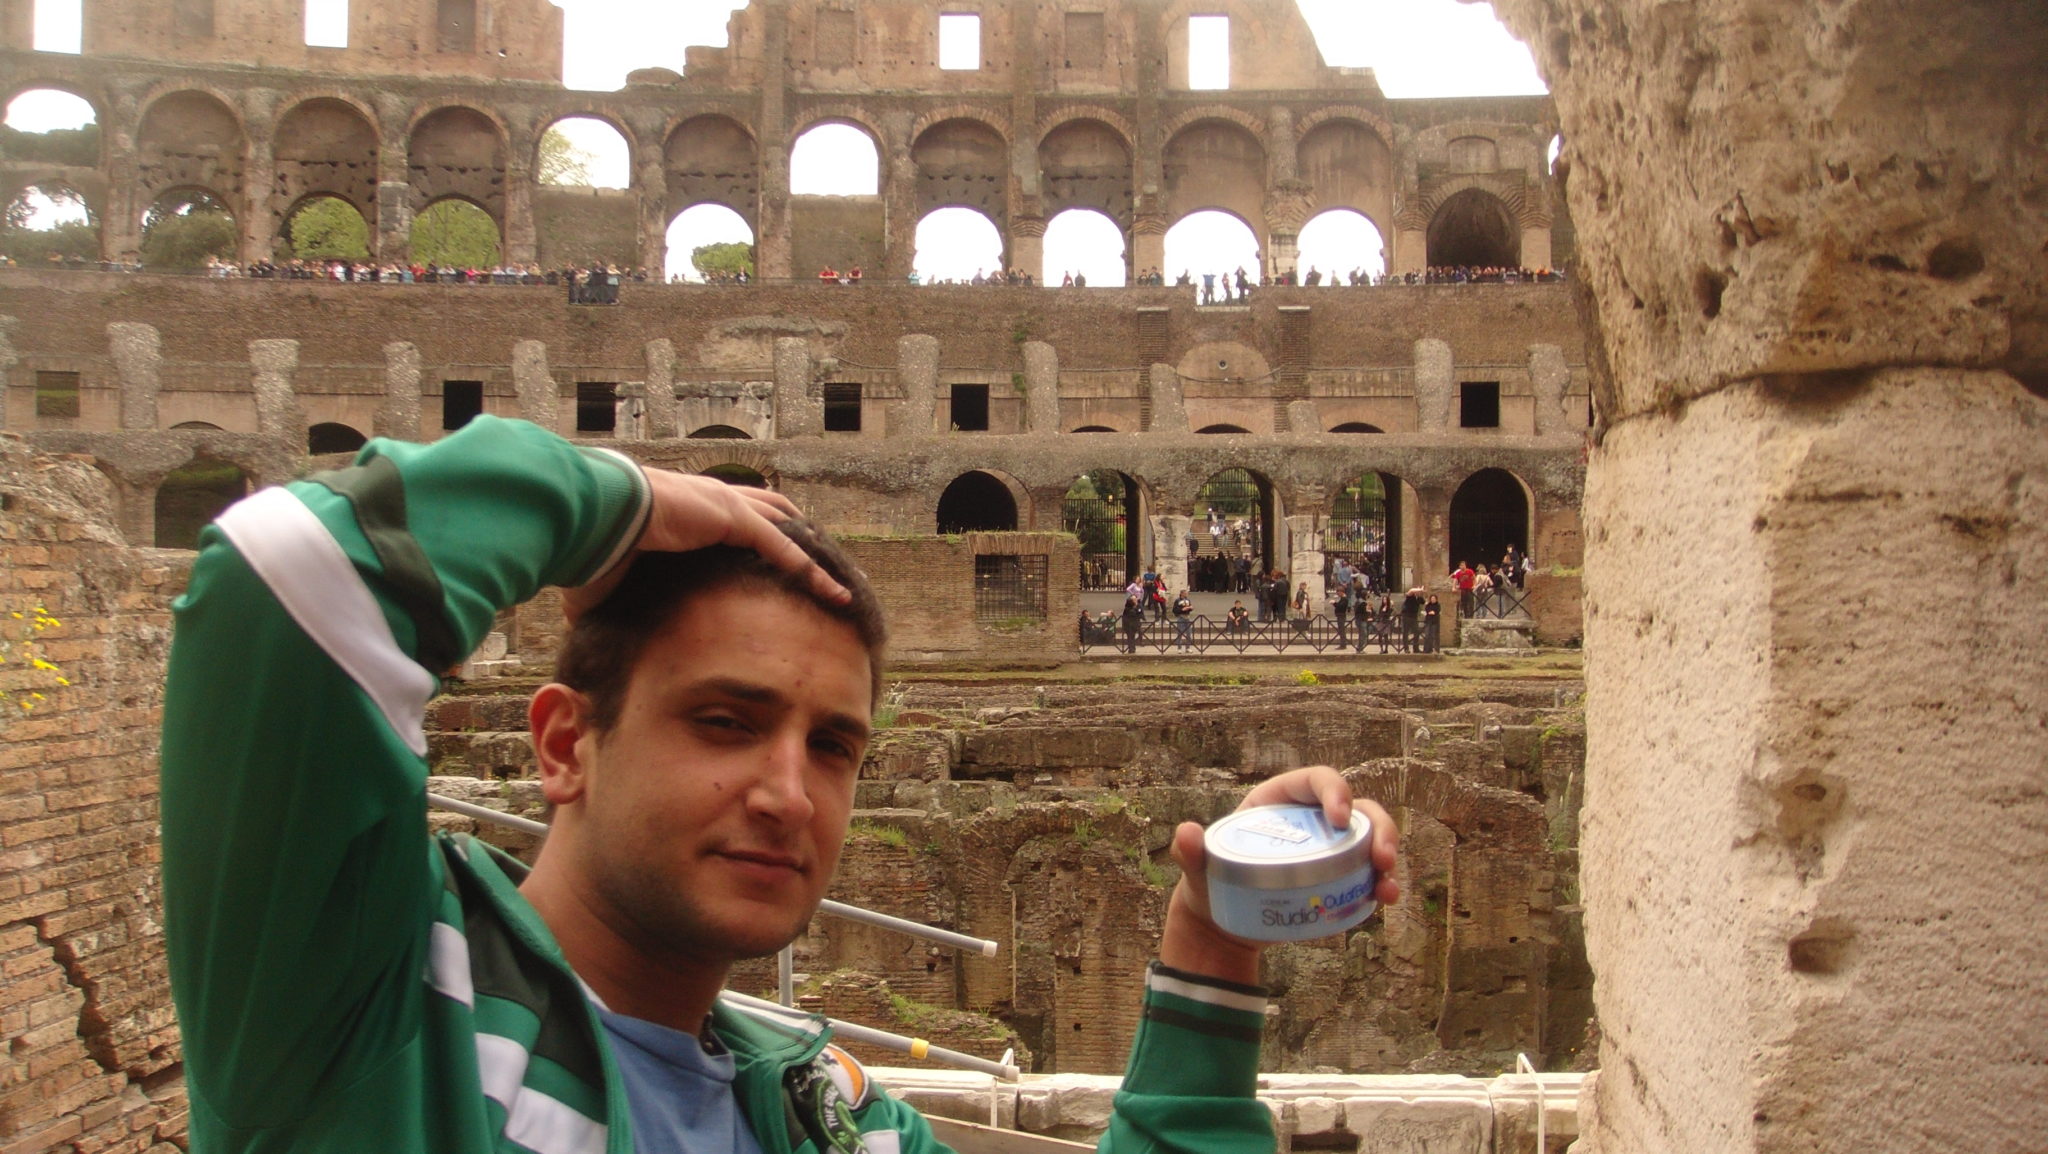 a man holding a jar of cream in front of an ancient coliseum